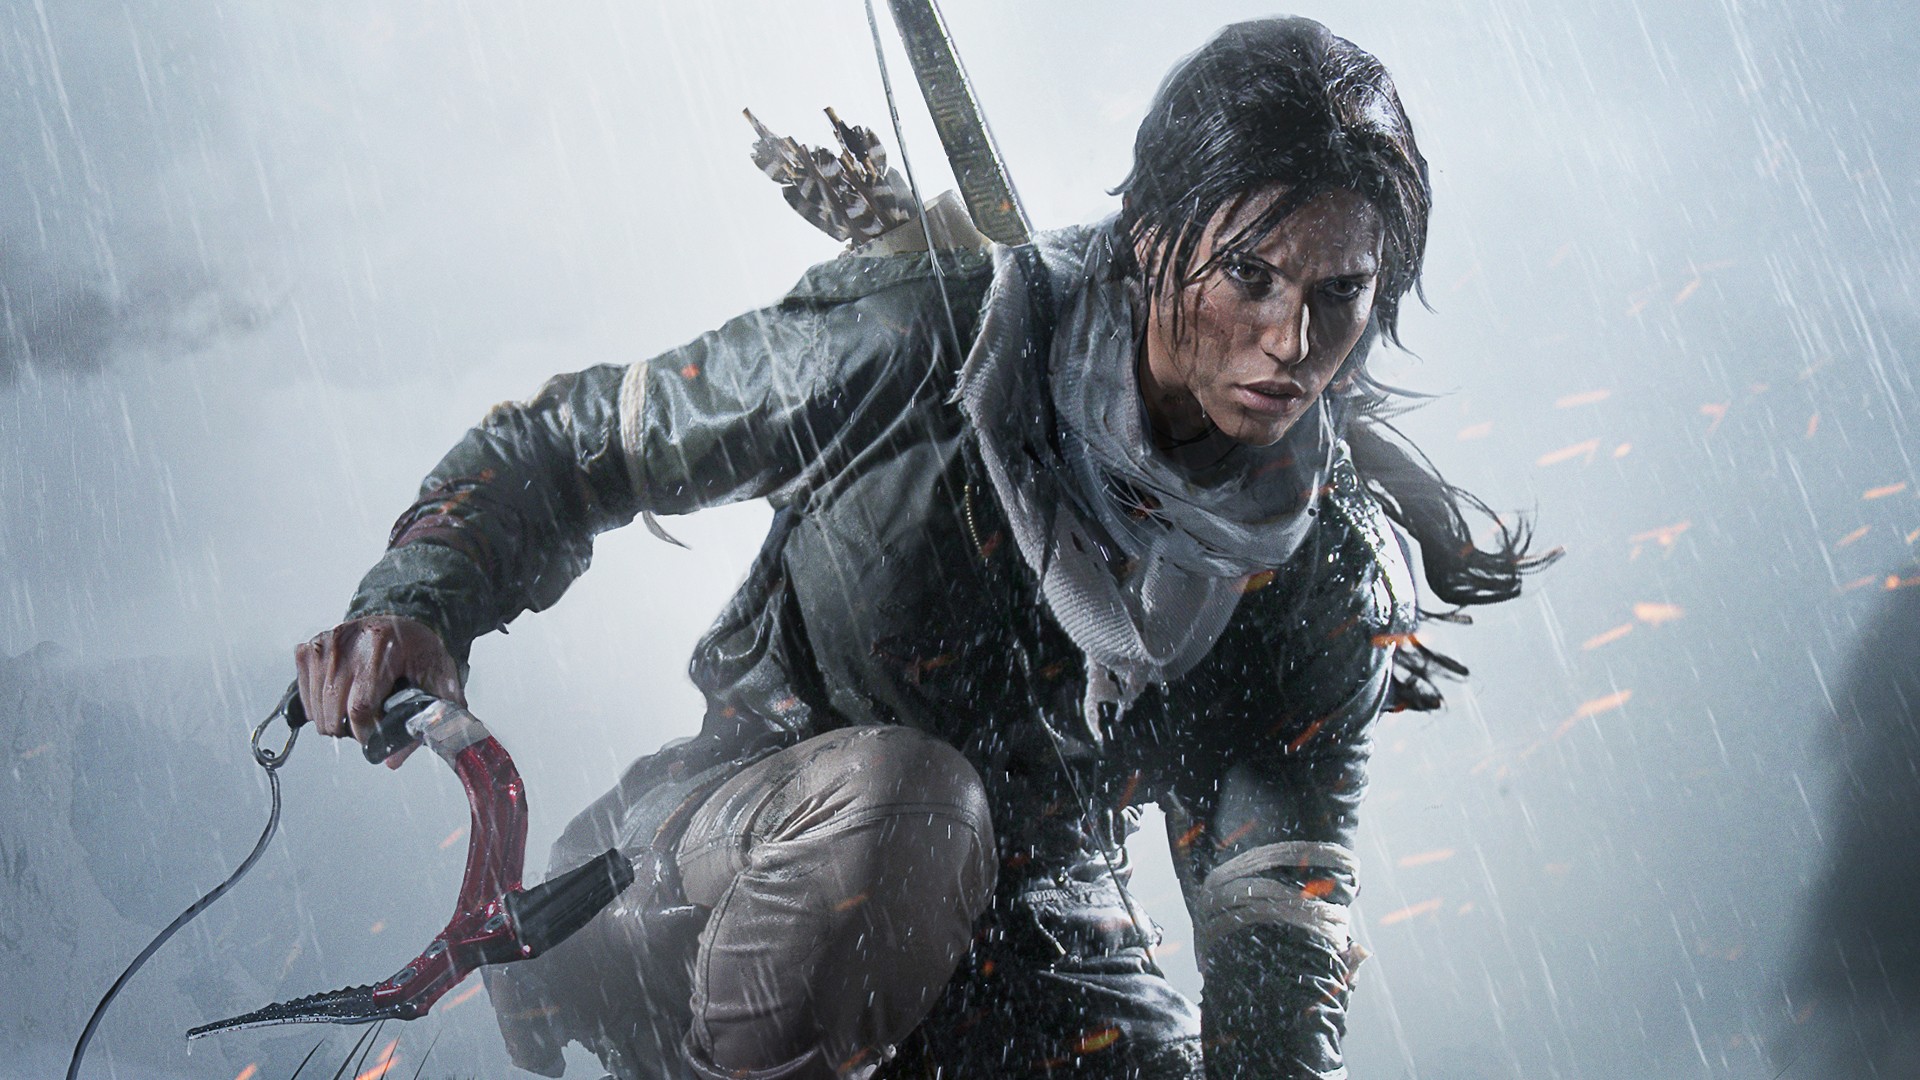 tomb raider, video game, rise of the tomb raider